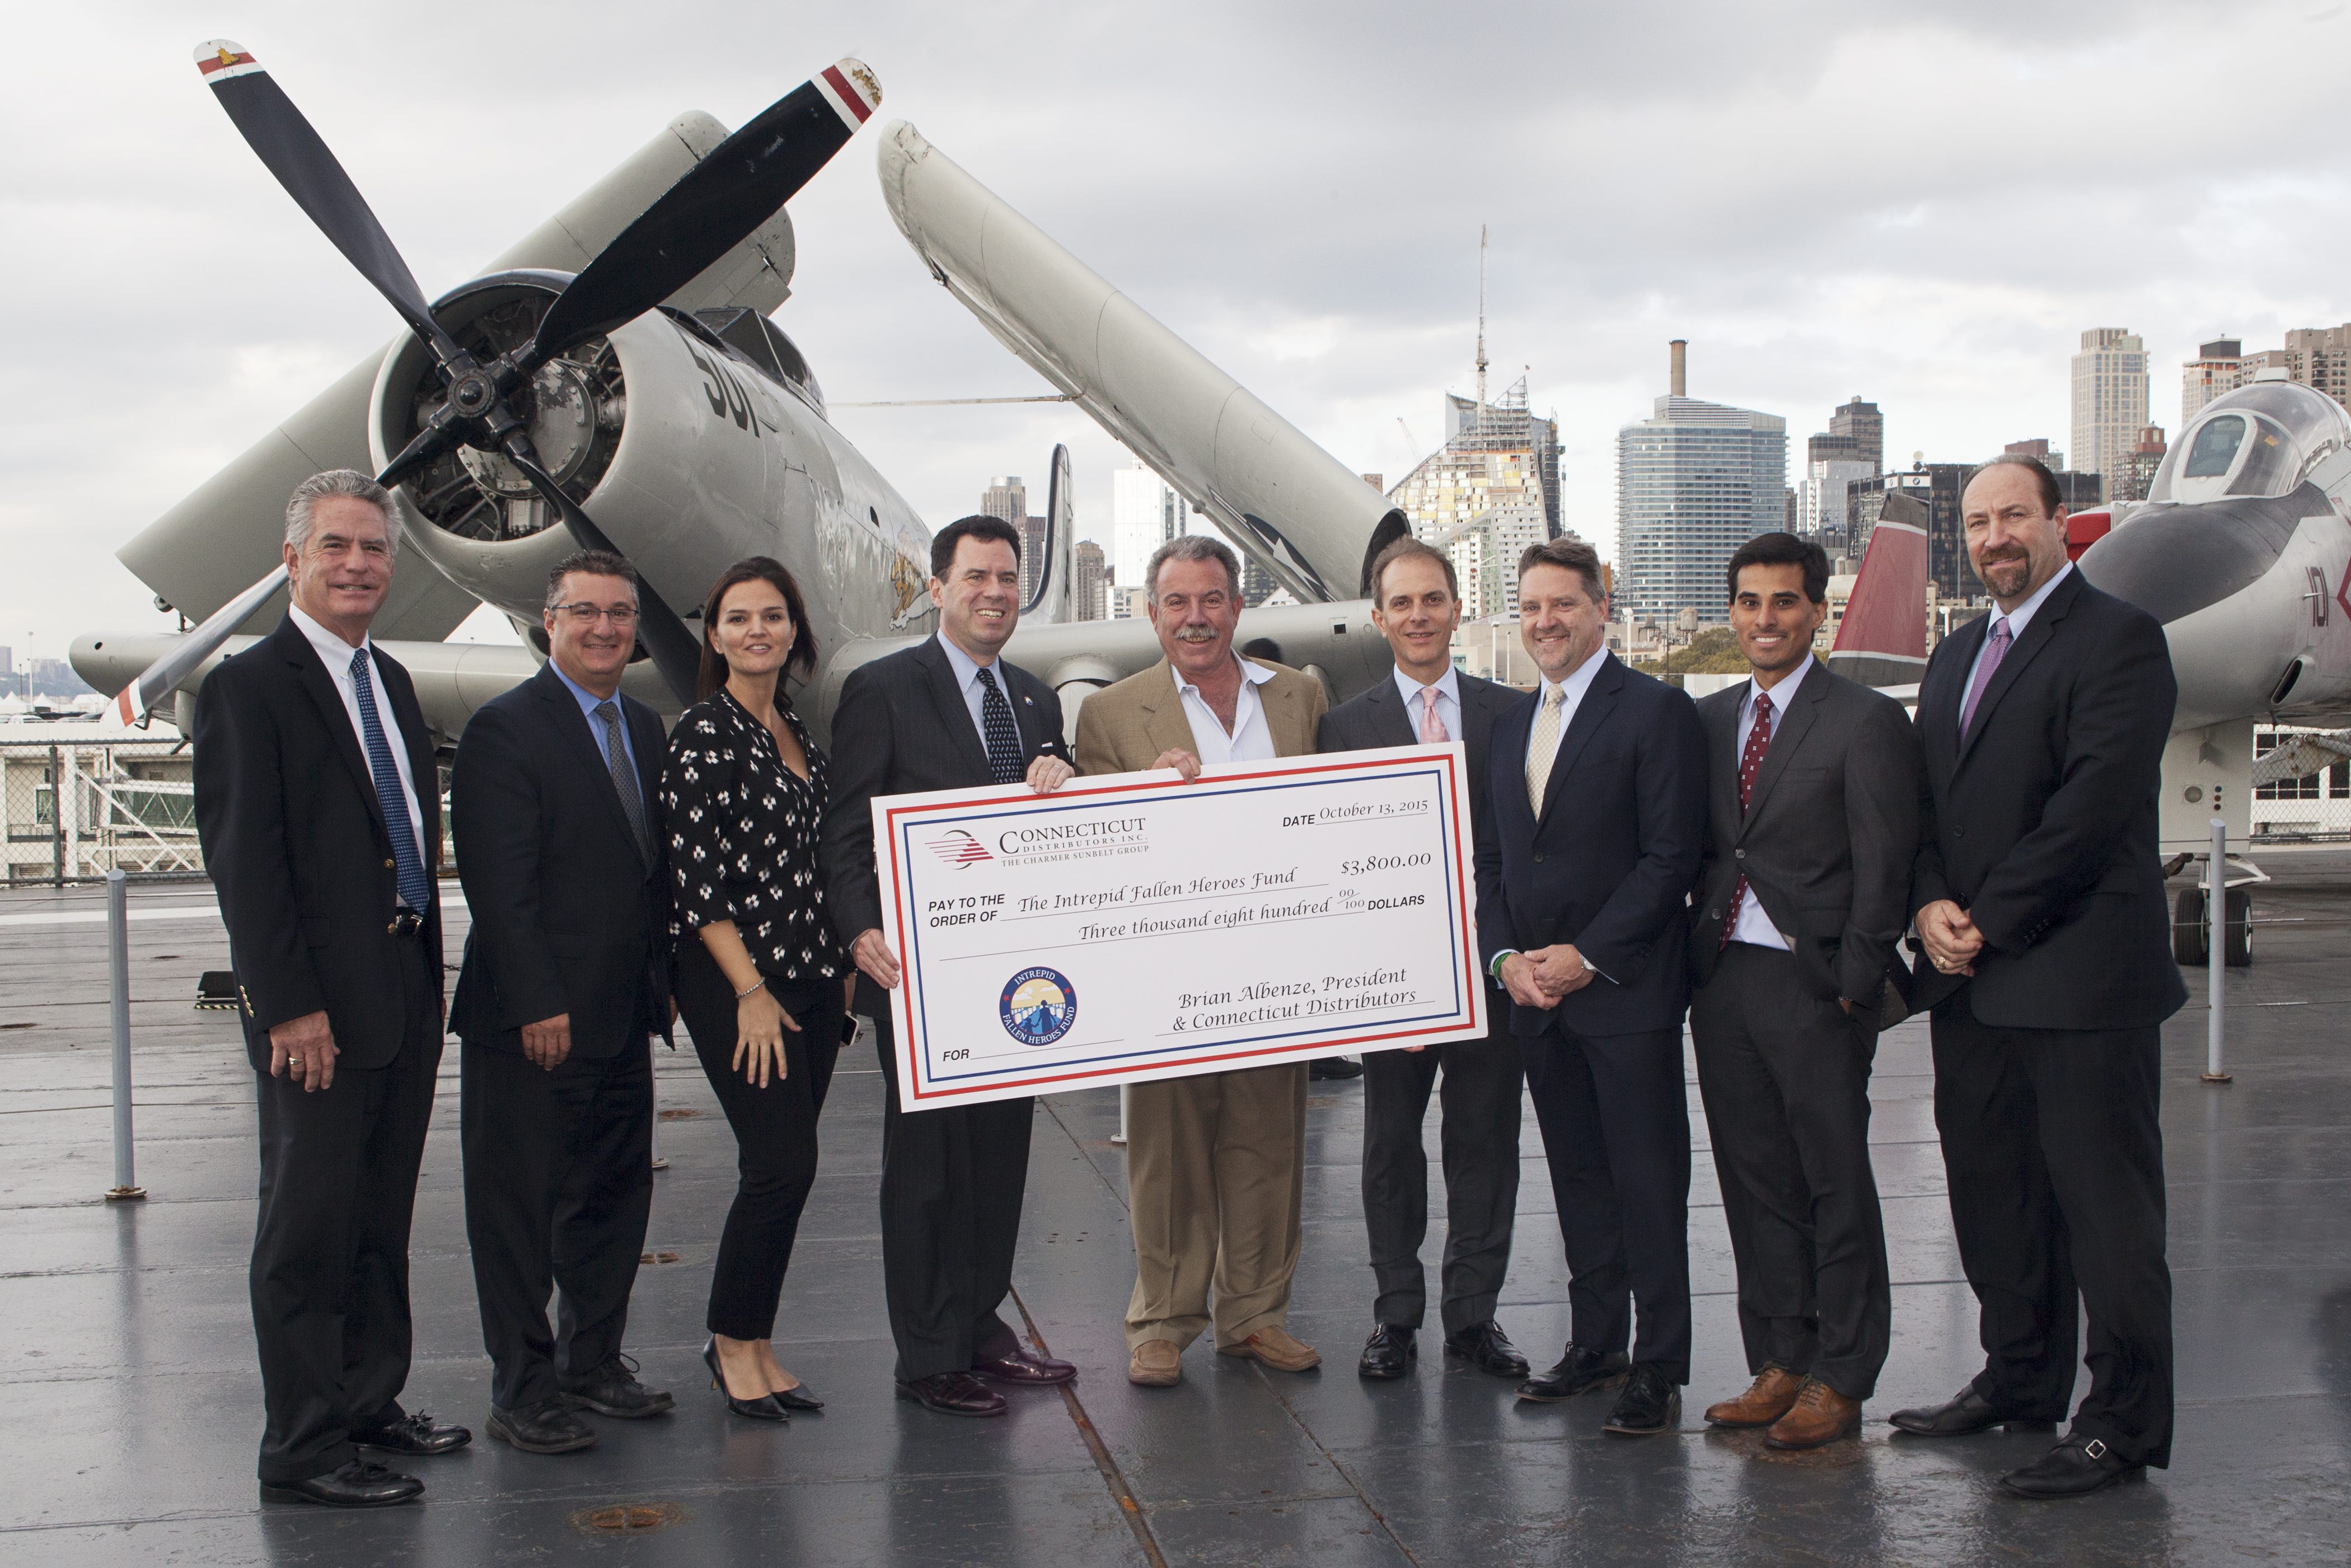 Connecticut Distributors Inc. presents their donation to Intrepid Fallen Heroes Fund President, David Winters and Vice President, Lisa Yaconiello.